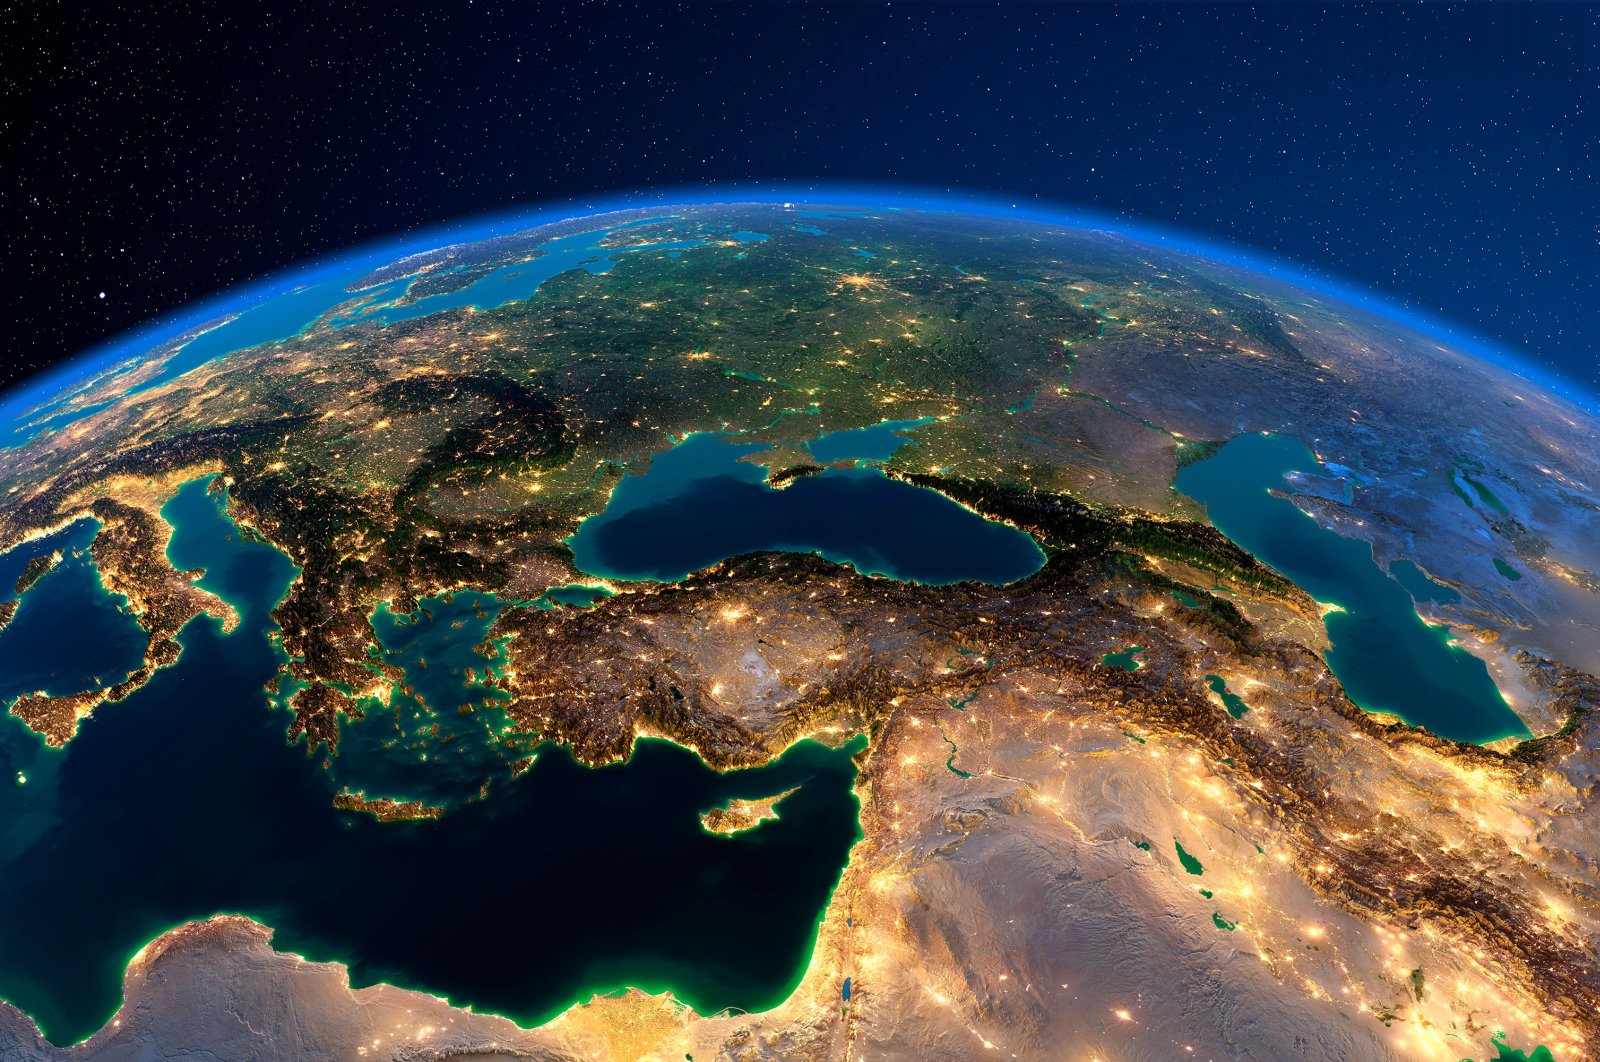 Planet Earth is lit by the lights of large cities, with Turkey seen at the center. (Photo by Shutterstock)